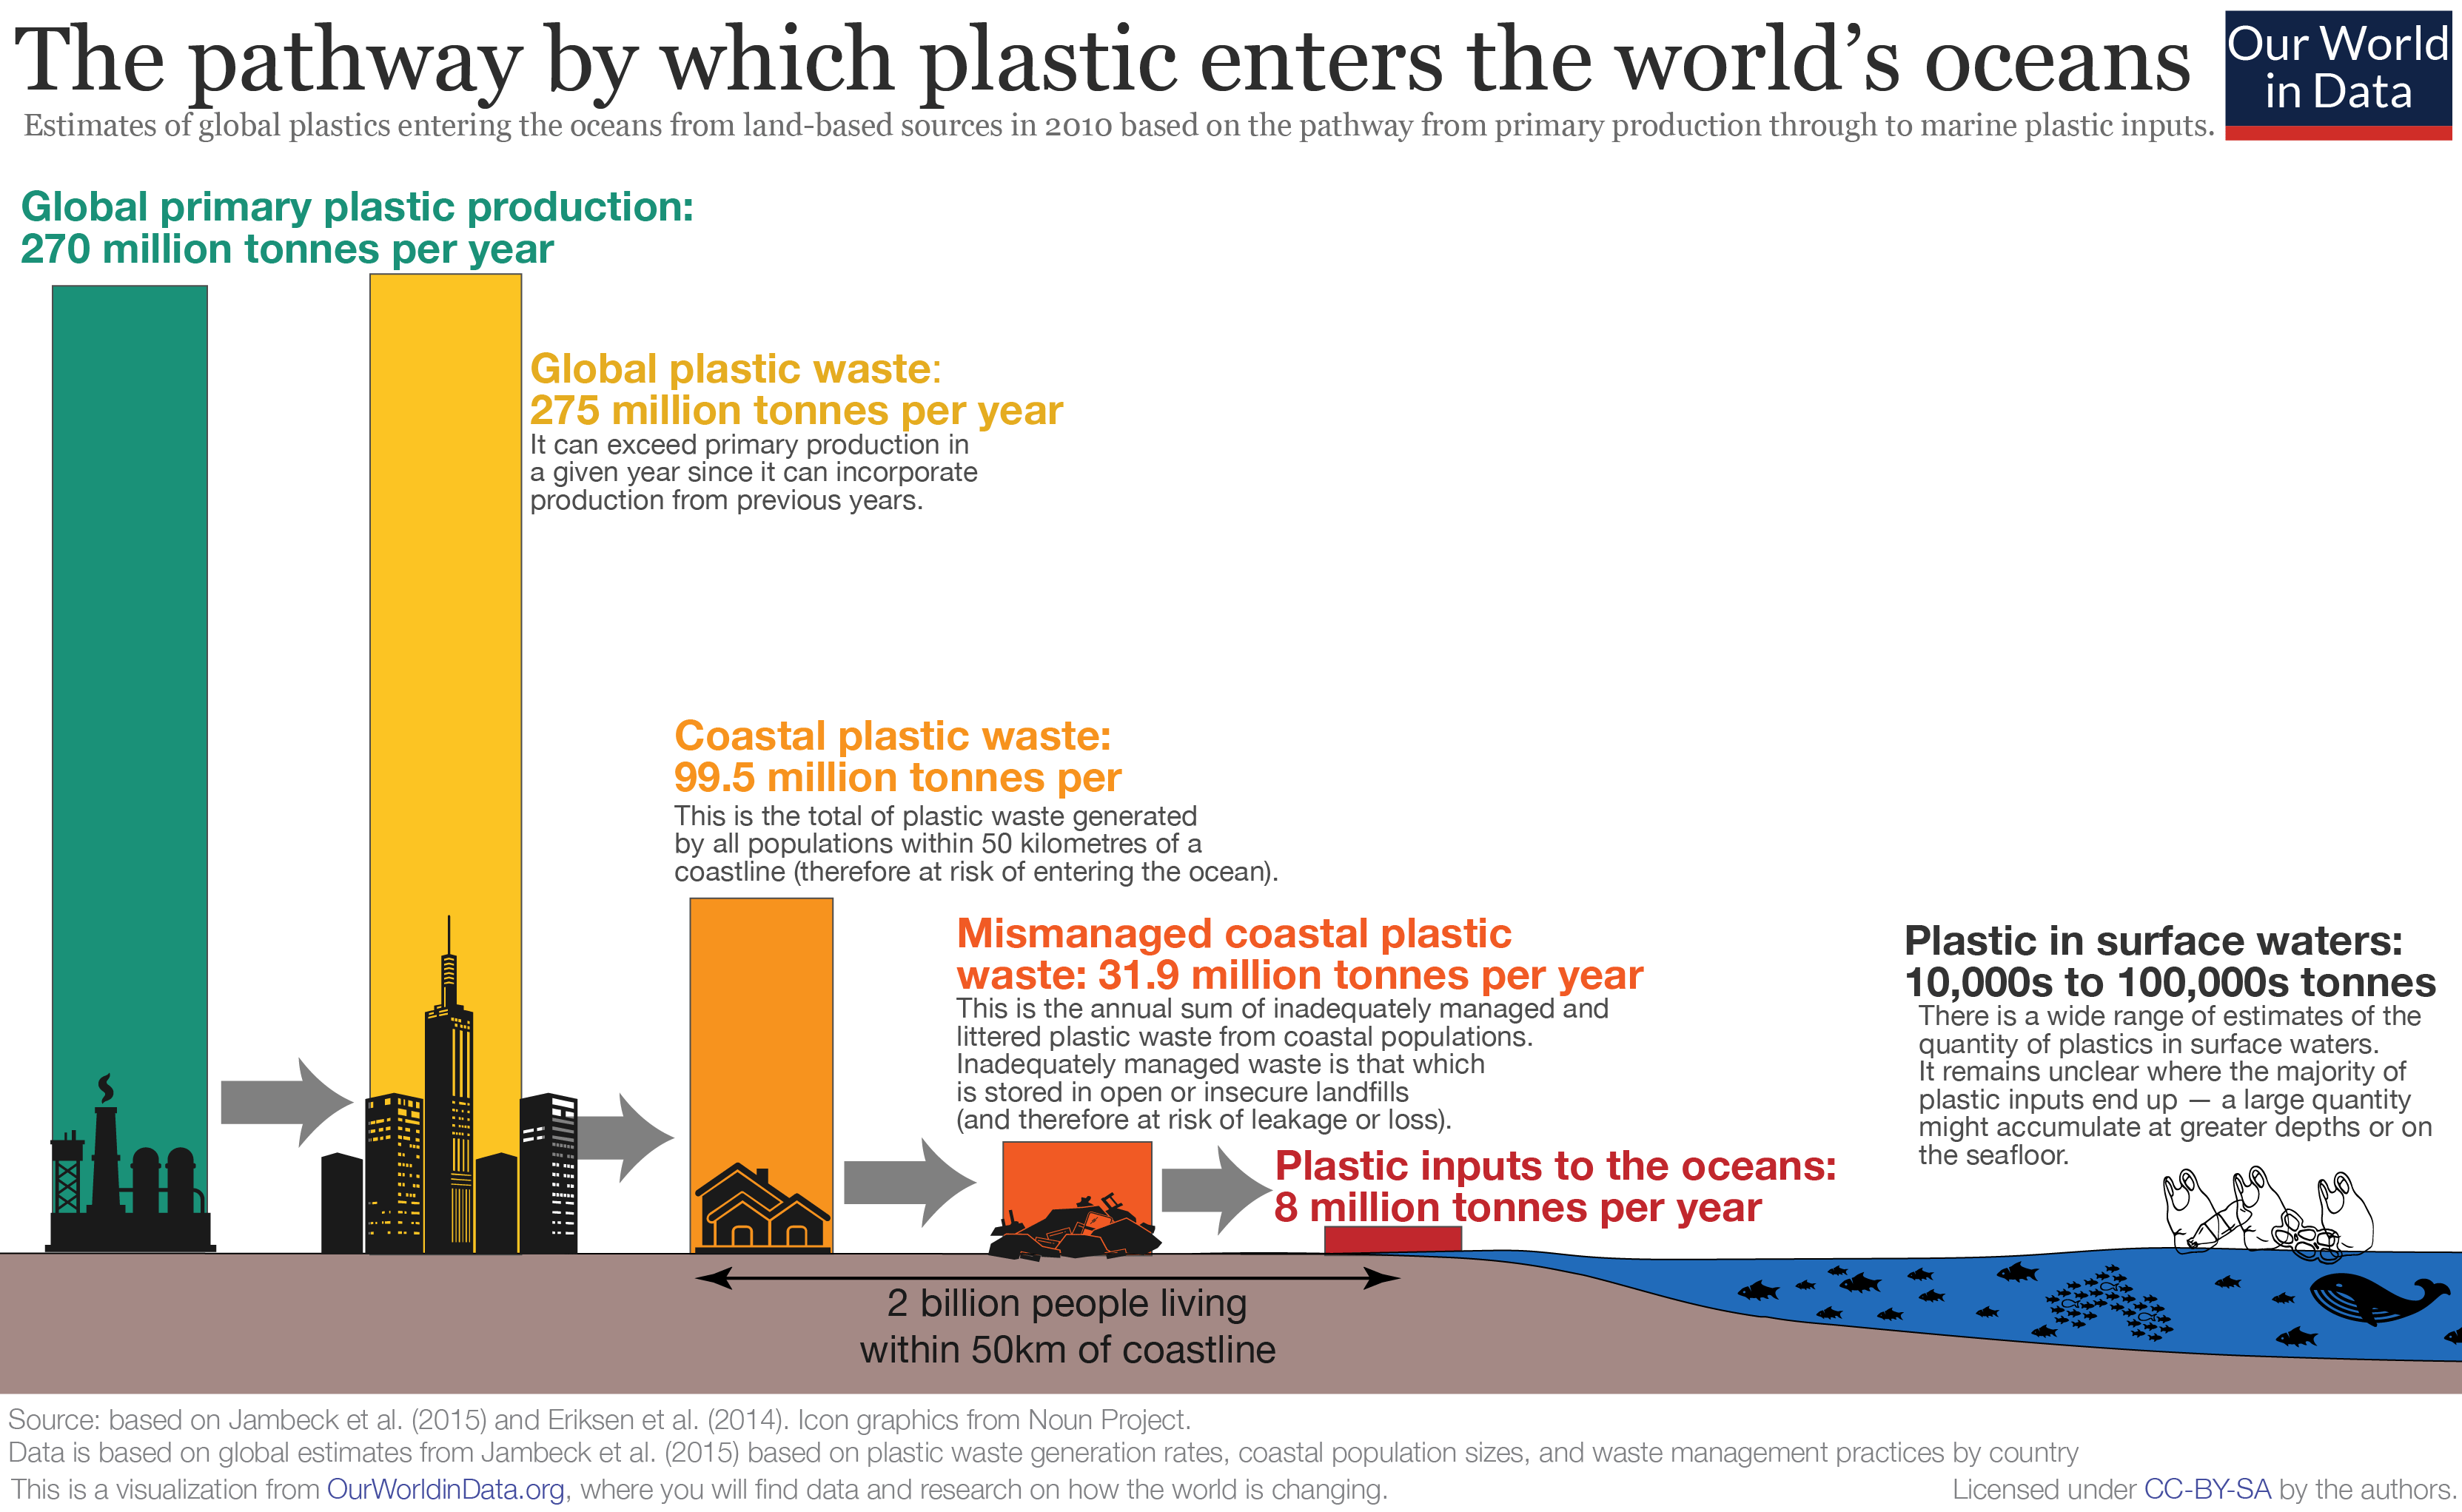 The pathway by which plastic enters the world's oceans from Our World in Data. 